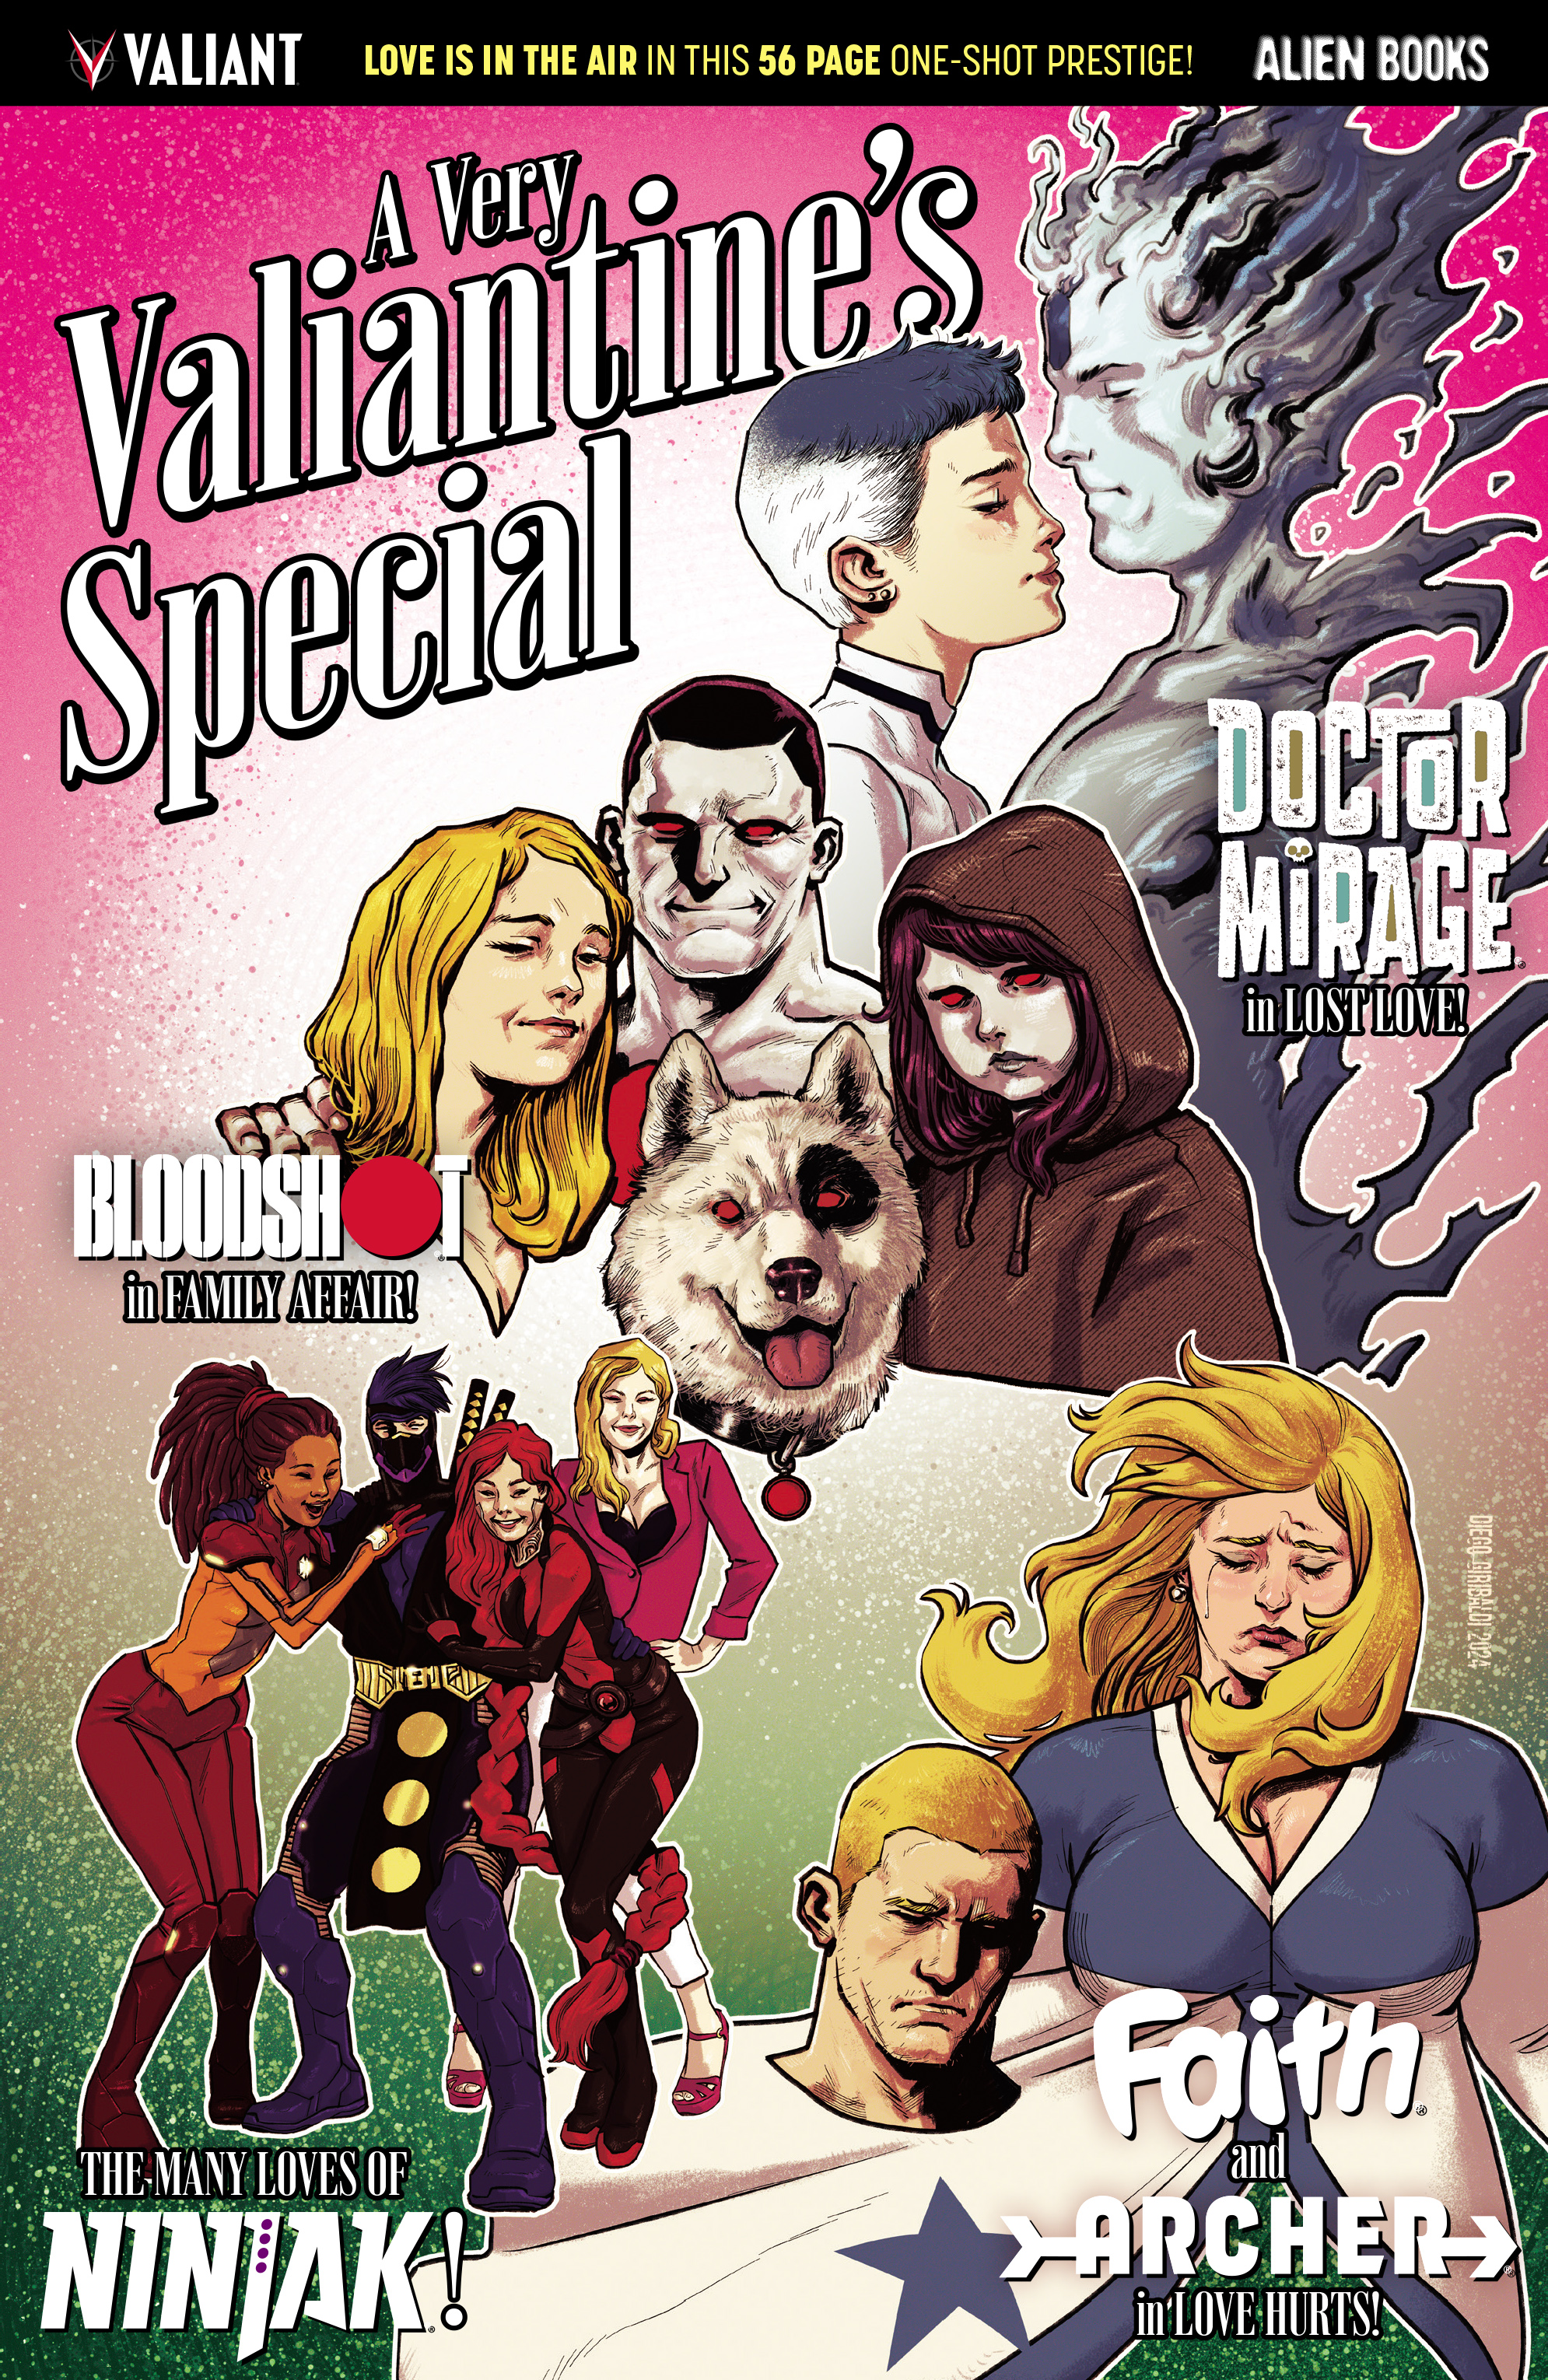 Read online A Very Valiantine's Special comic -  Issue # Full - 1